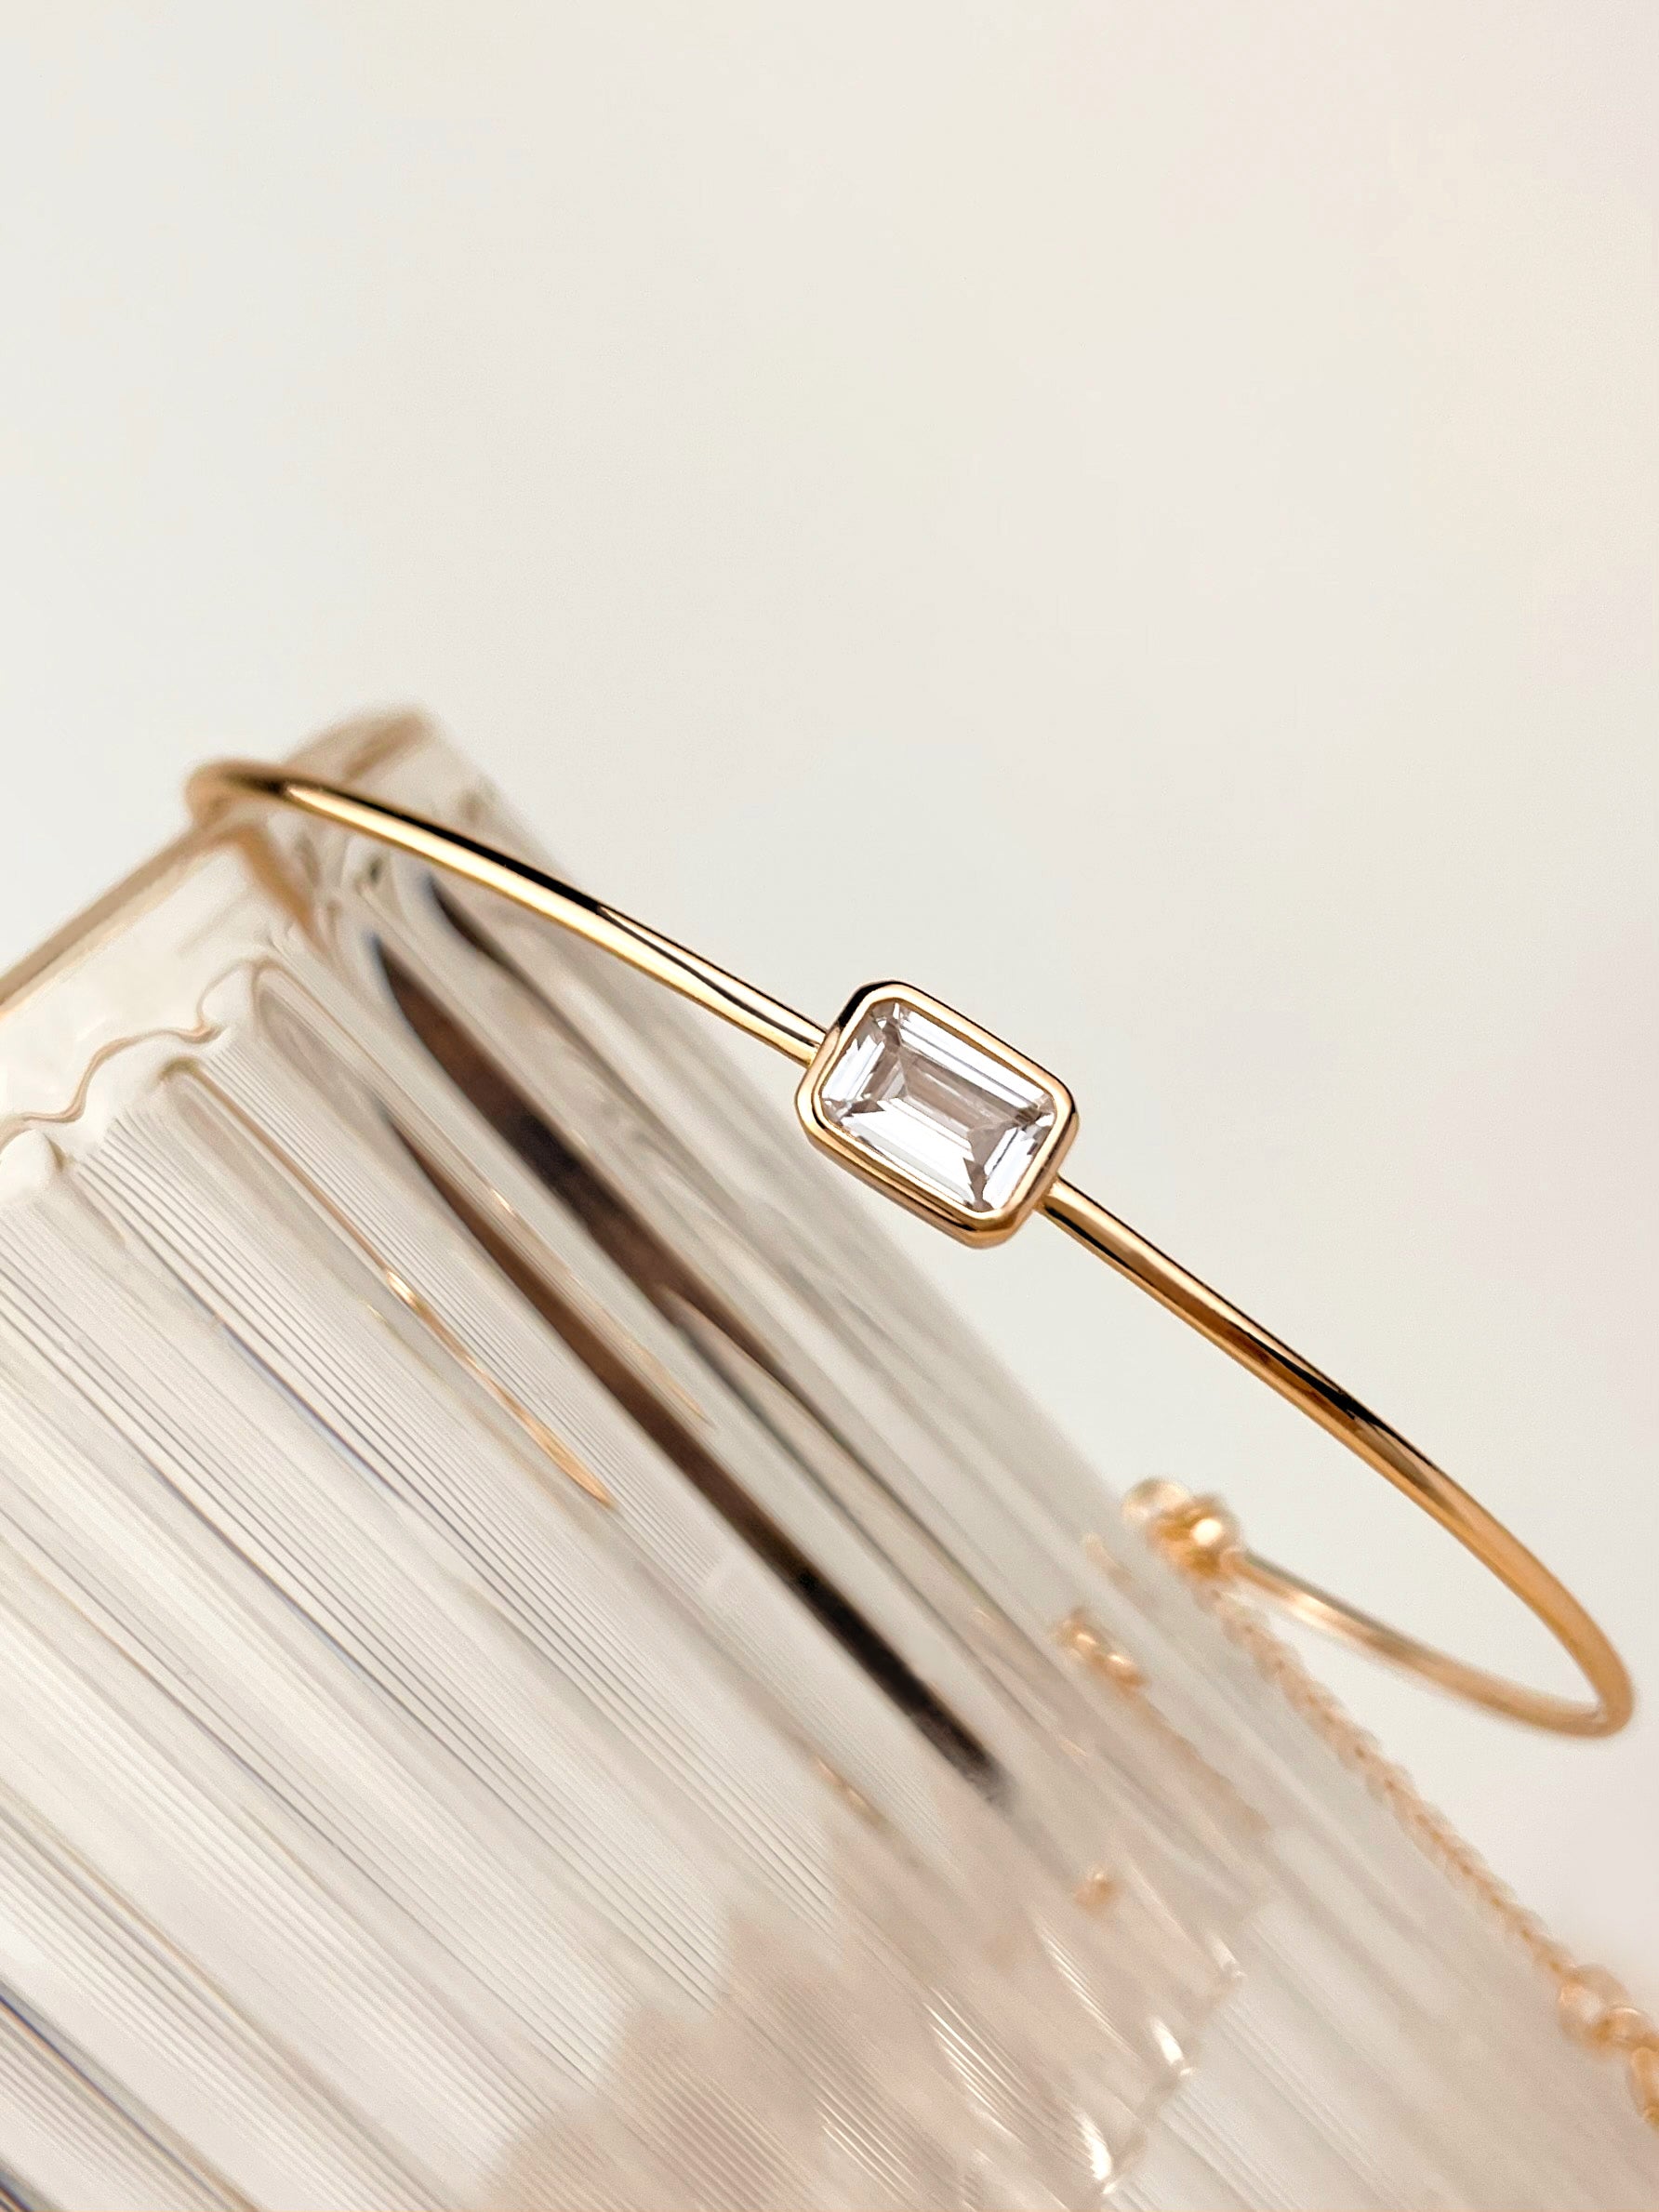 Tender Objects New Light Demi bracelet - Elegant design with emerald-cut stone. Elevate your style with modern sophistication.